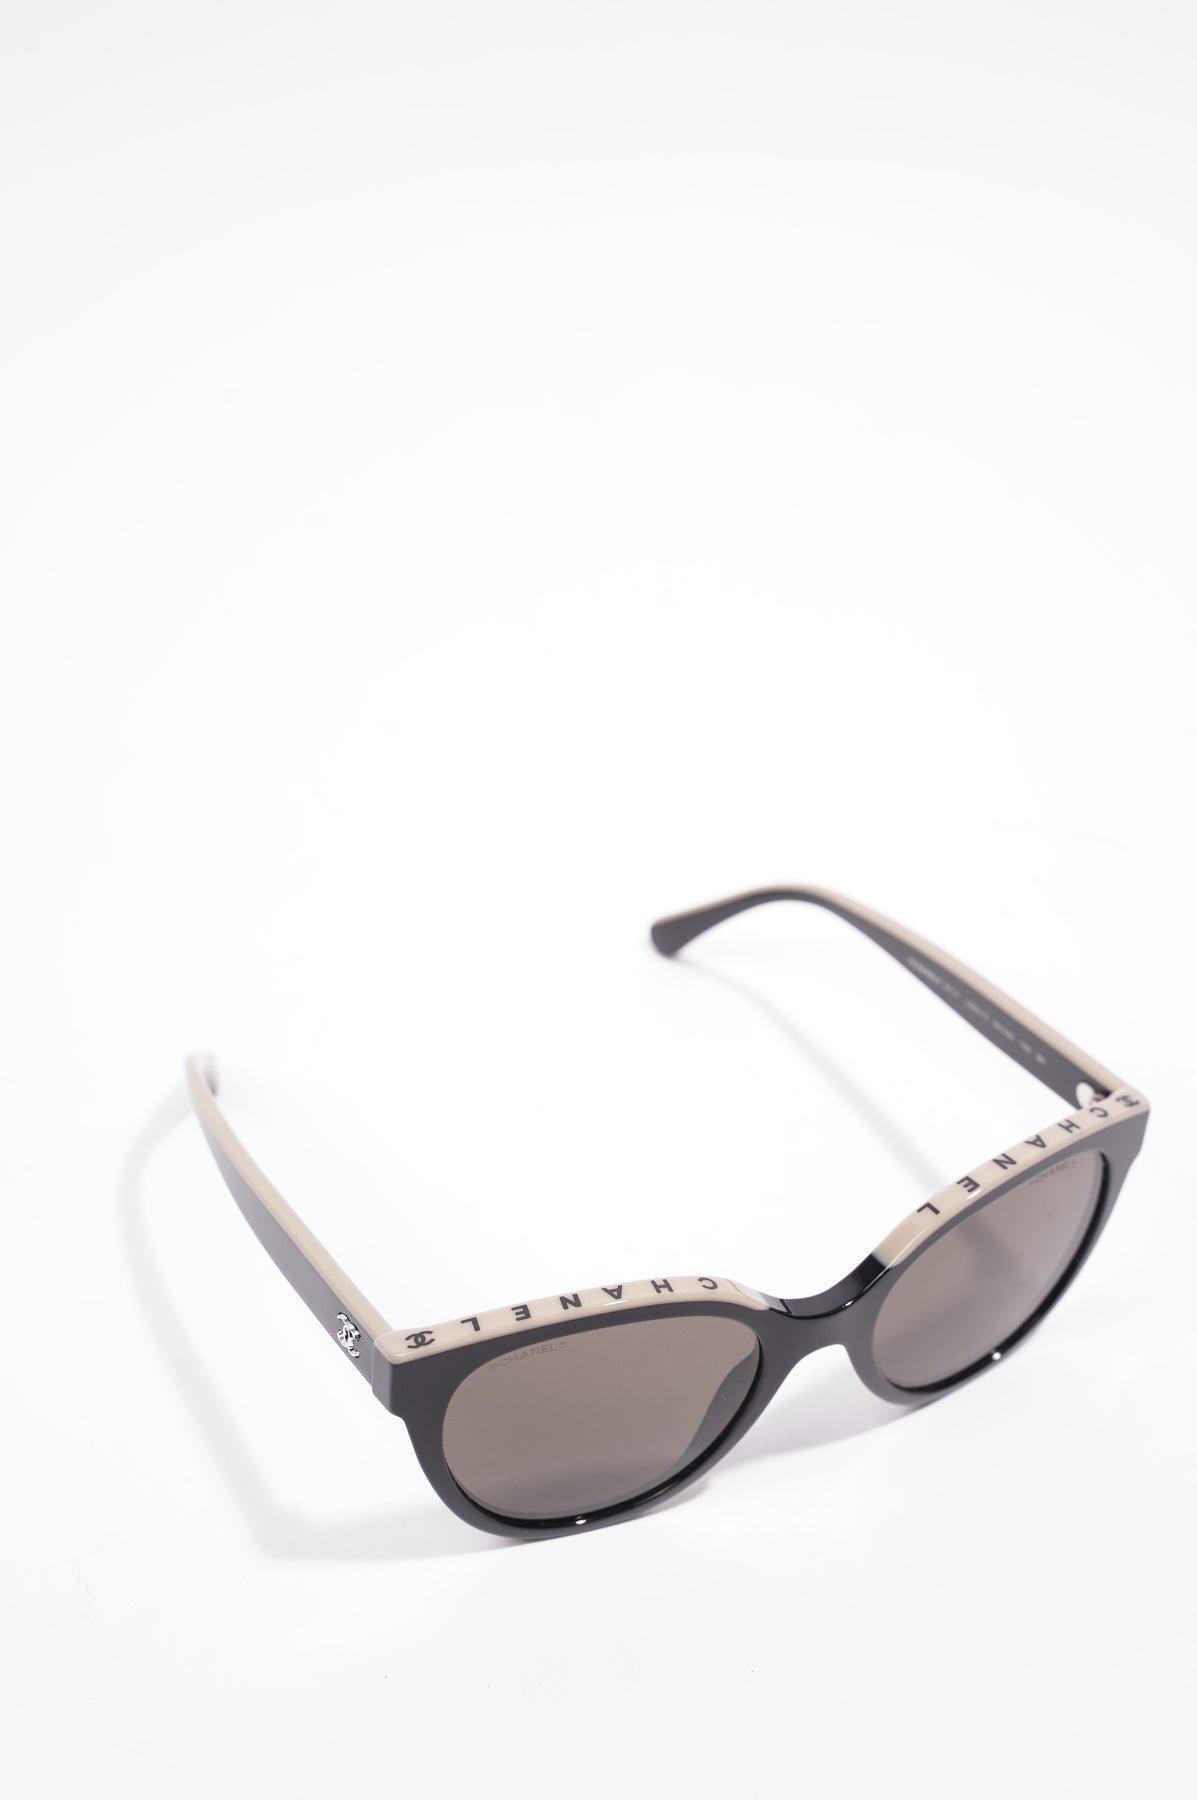 Chanel Butterfly Sunglasses Black Acetate 140 – Luxe Collective